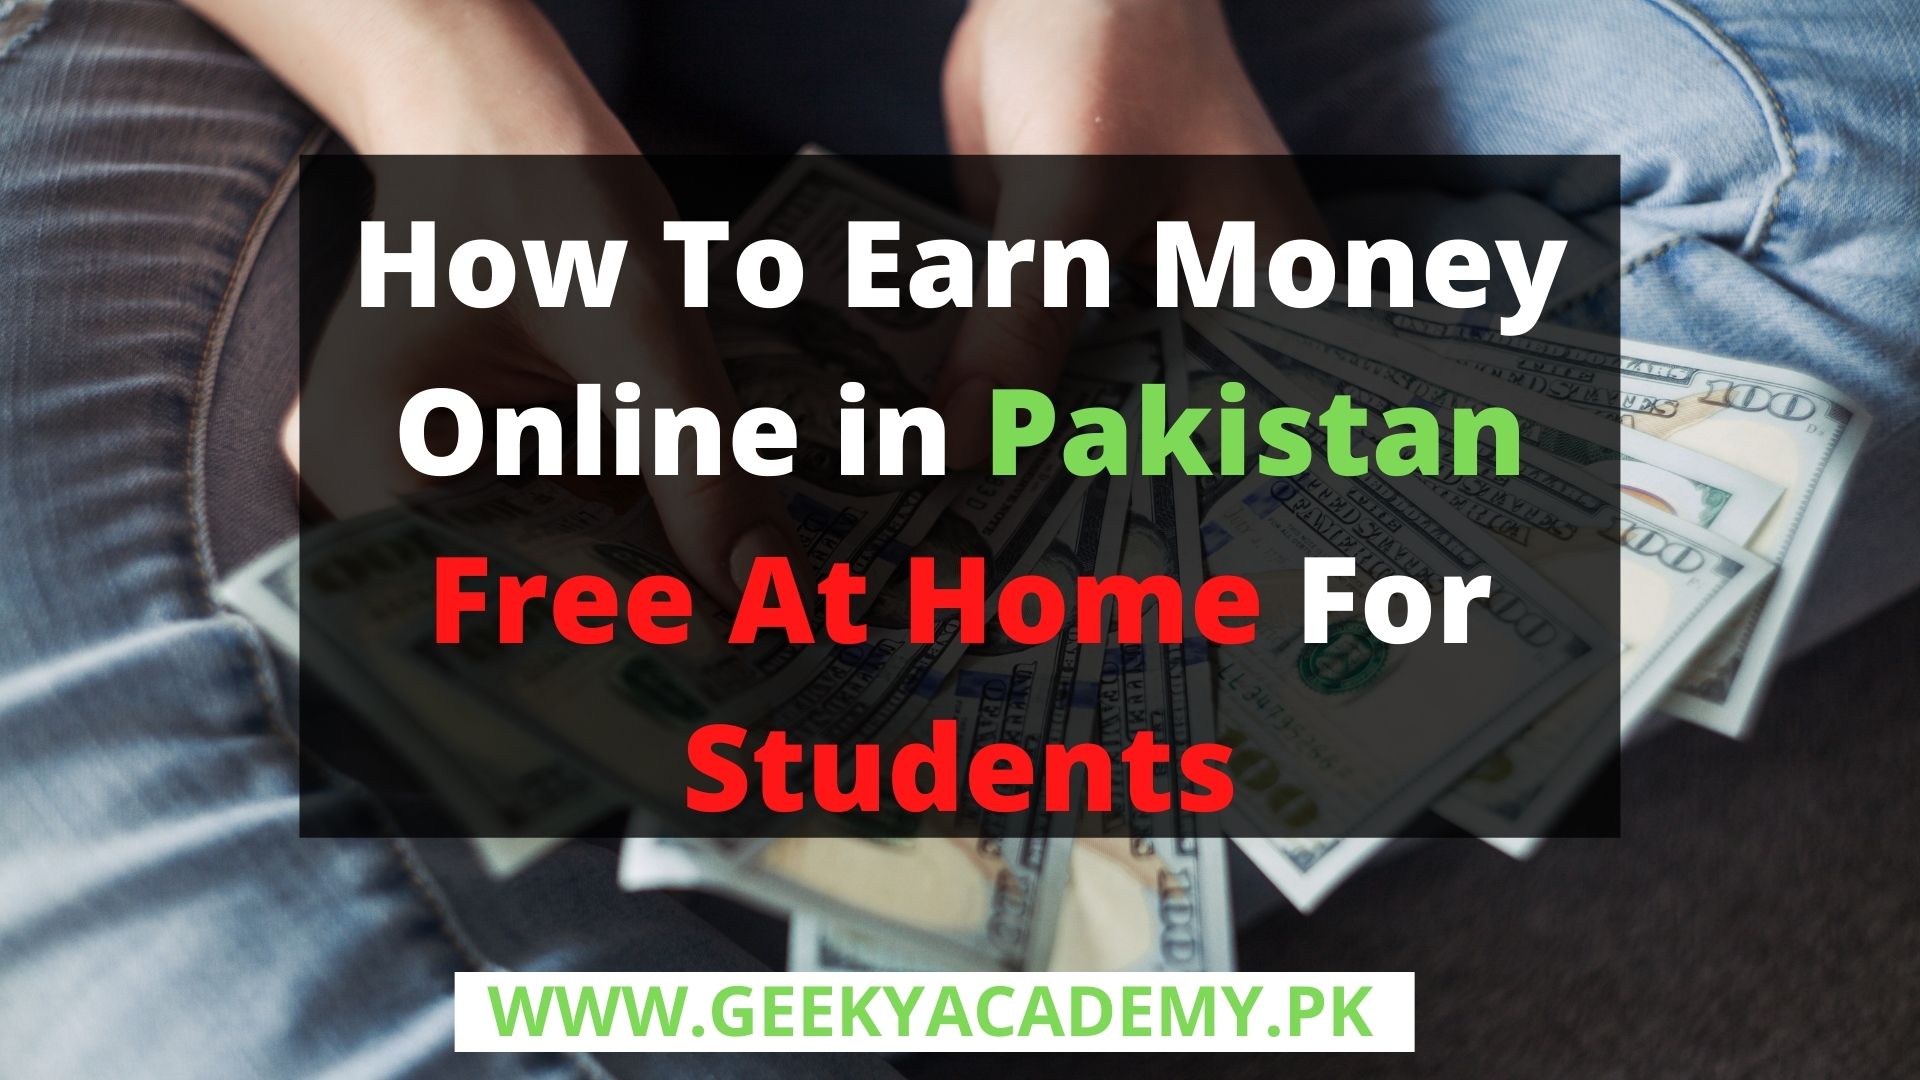 How To Earn Money Online in Pakistan Free At Home For Students